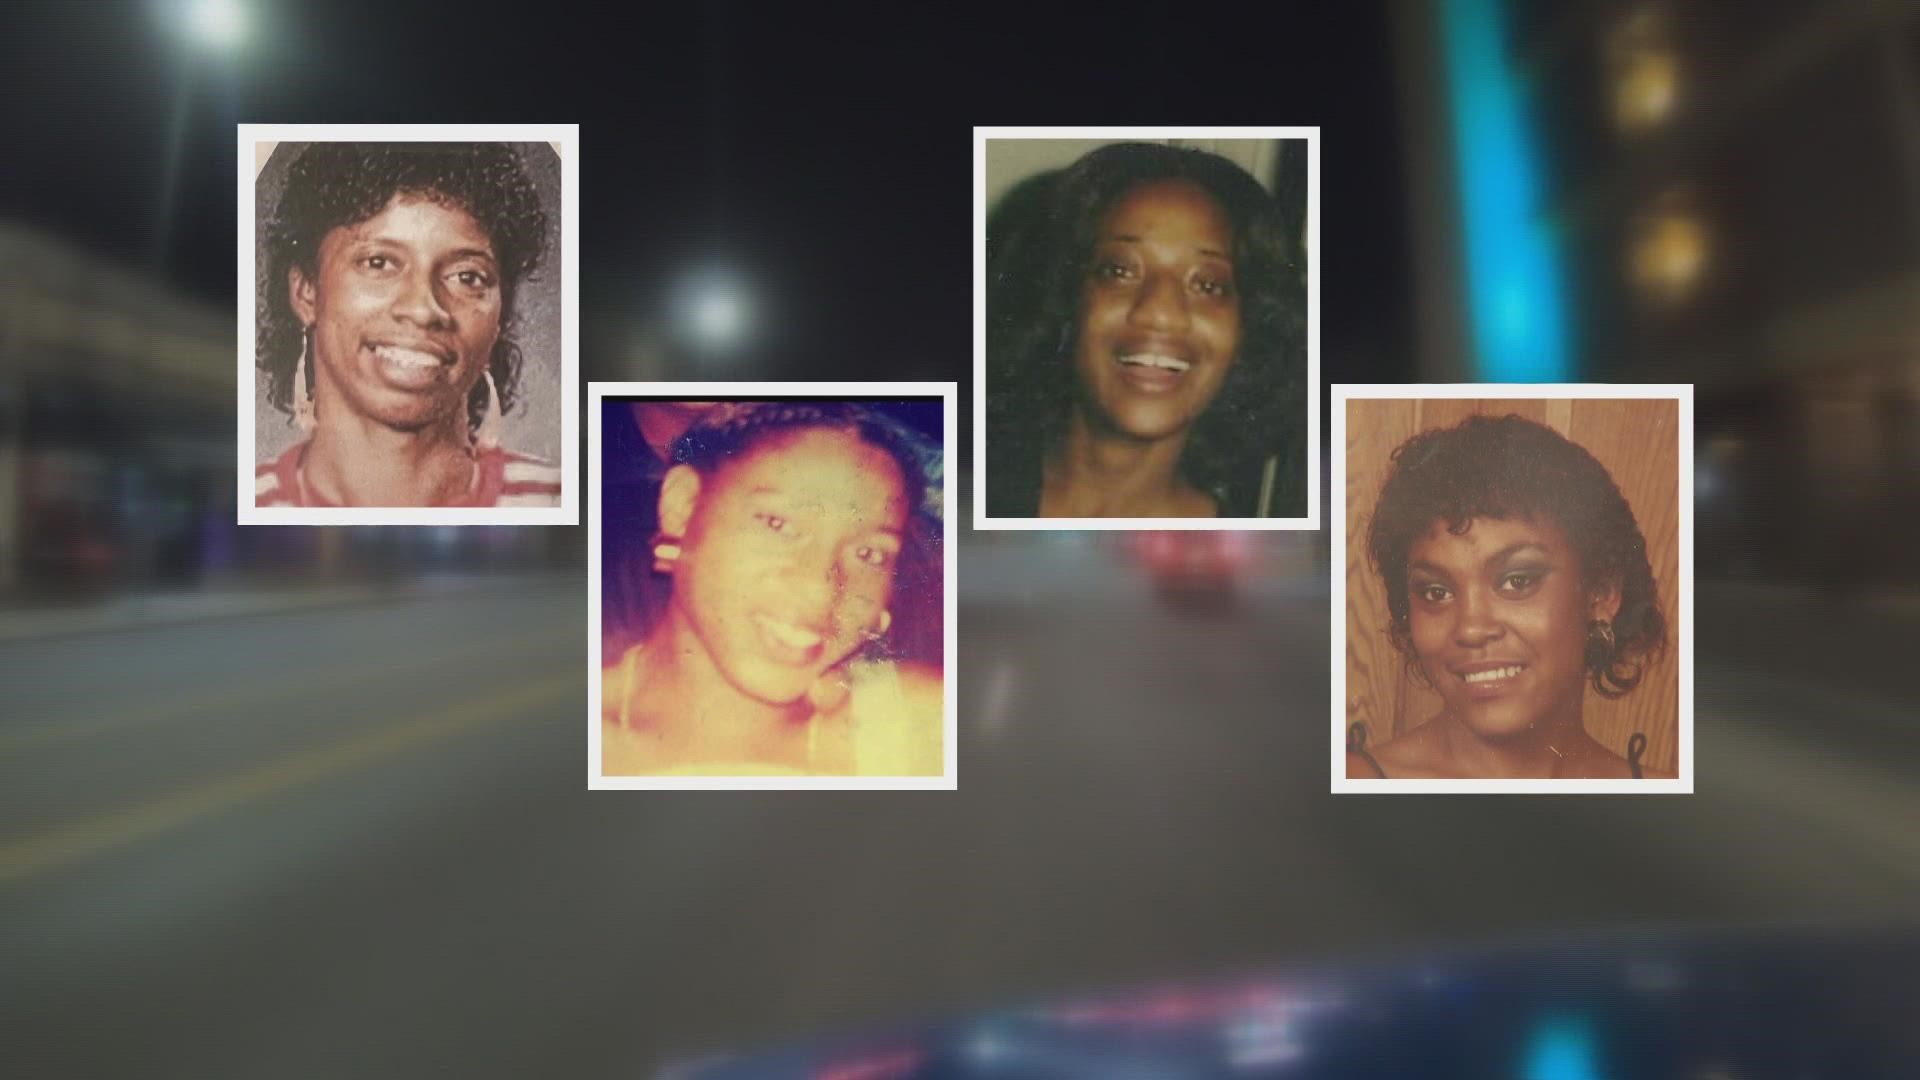 Four women known to work along Colfax Avenue were found dead in Weld County between 1981 and 1992. All four cases remain unsolved.